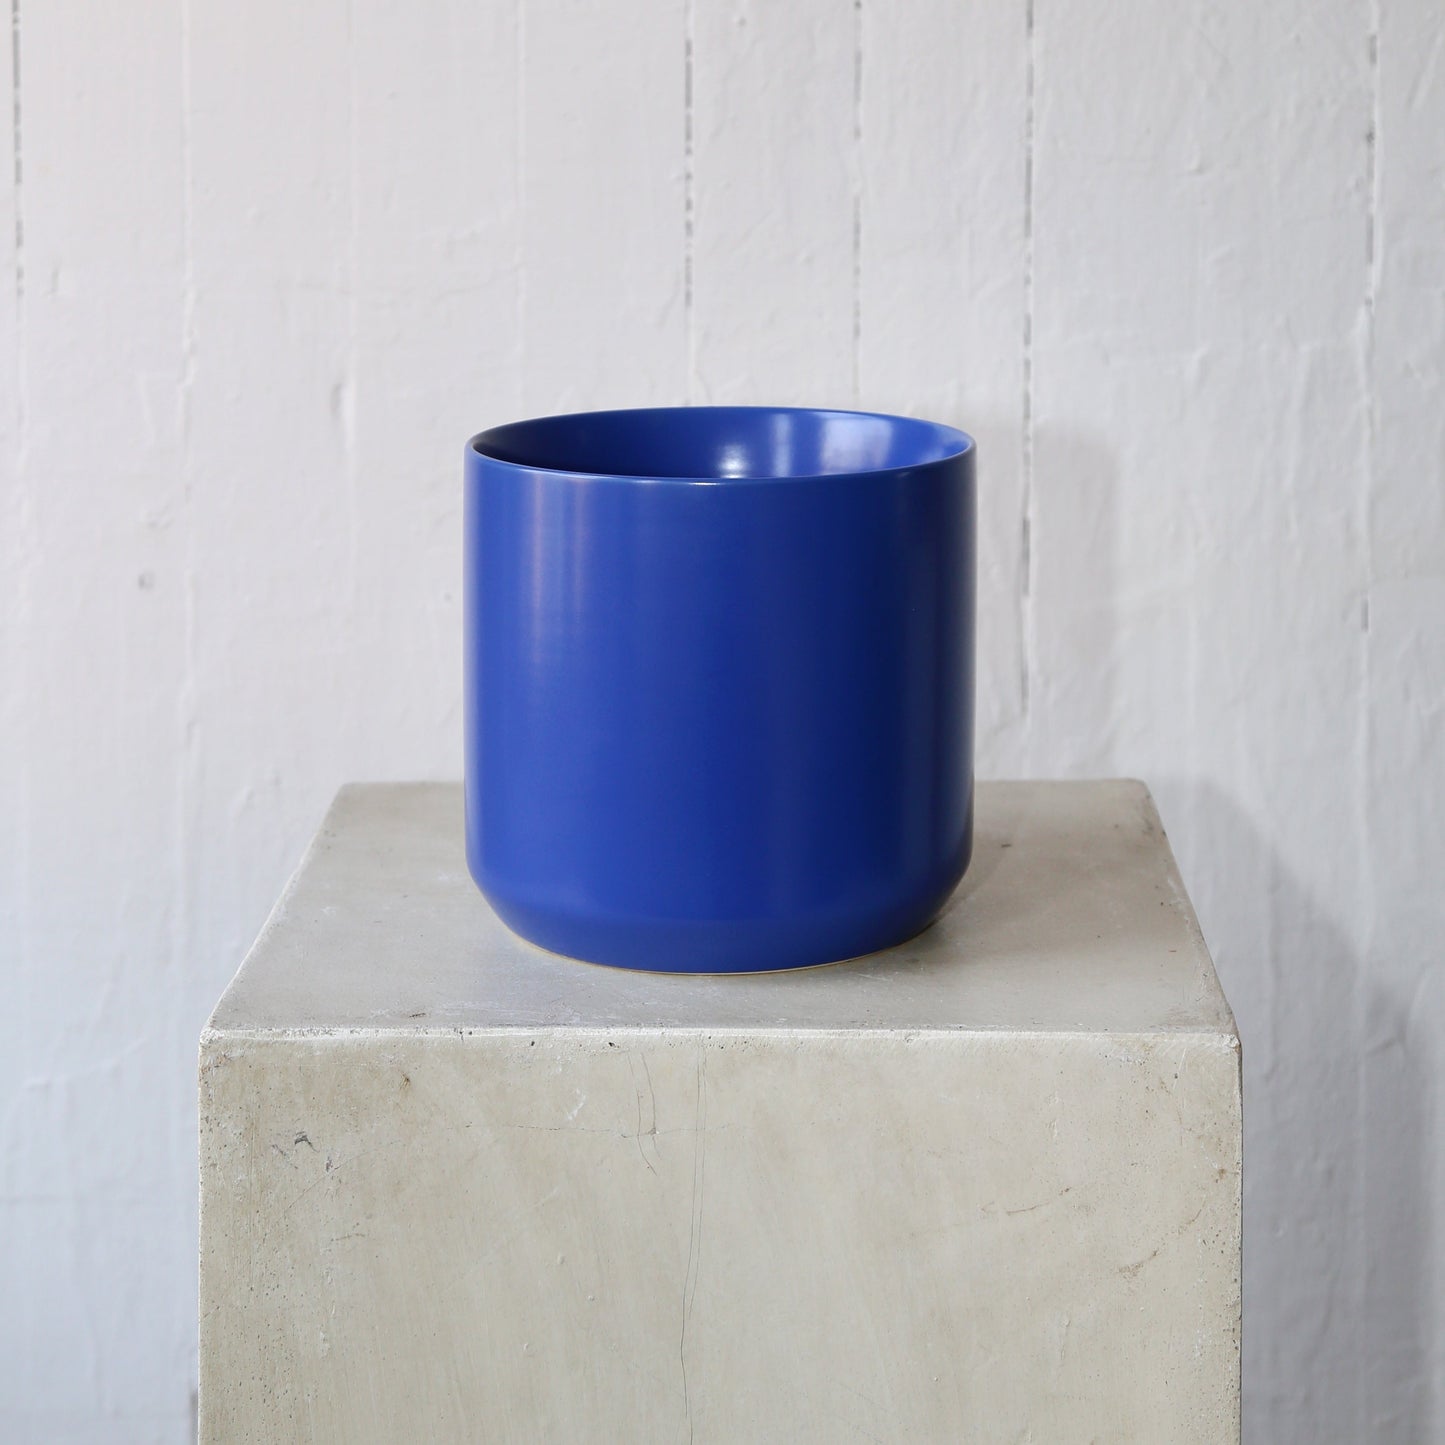 7" Blue Kendall Pot available at Rook & Rose.